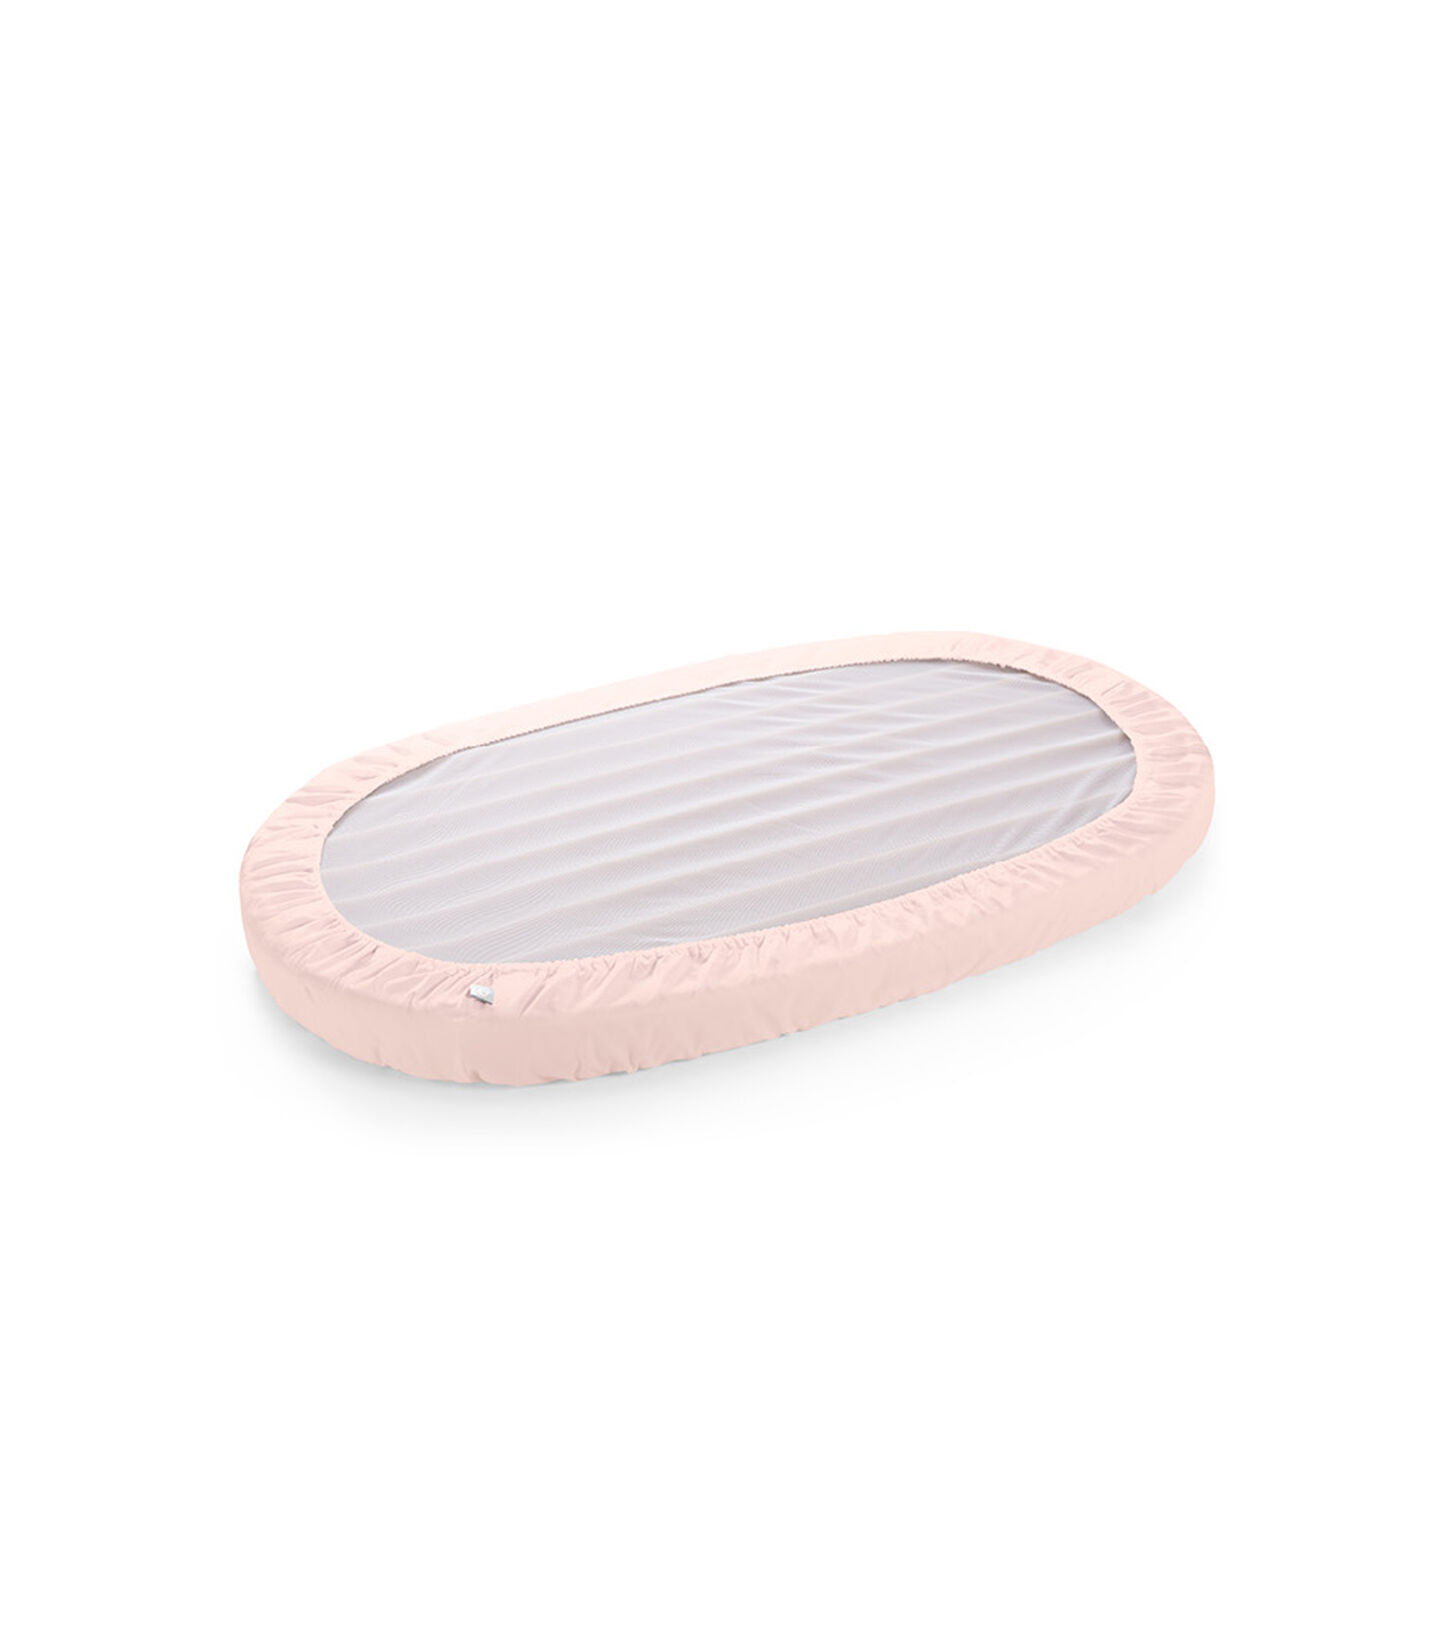 Stokke® Sleepi™ Fitted Sheet Pink, 桃粉色, mainview view 3